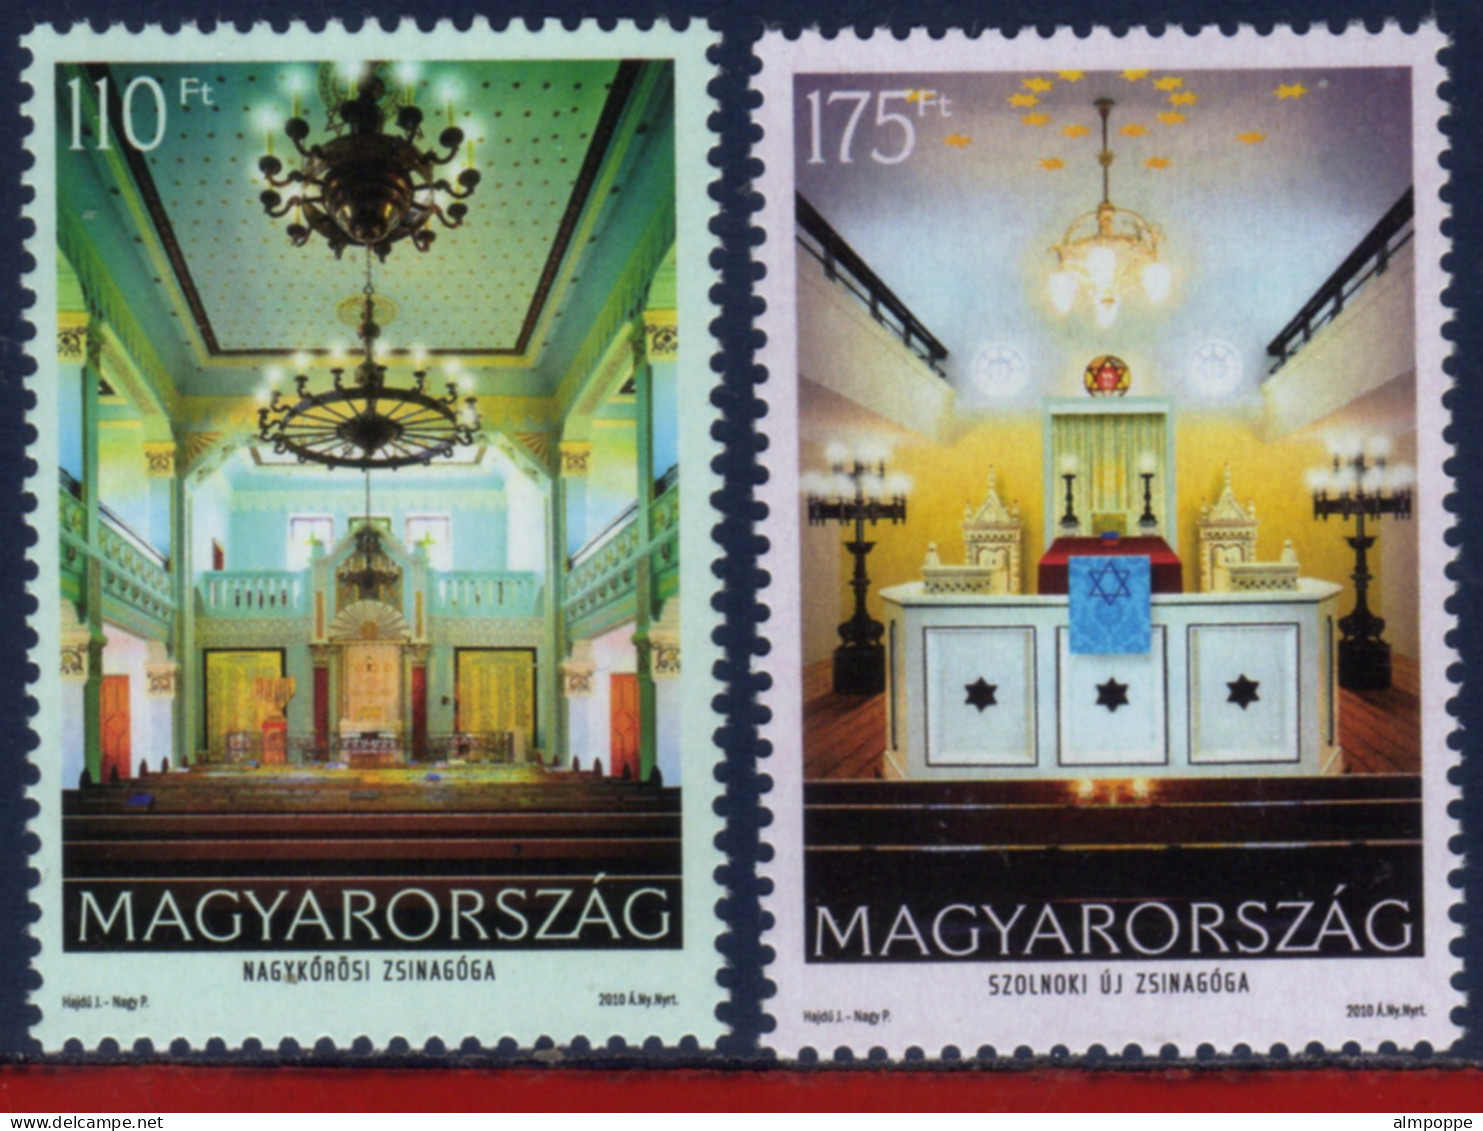 Ref. HU-V2010-6 HUNGARY 2010 - SYNAGOGUES IN HUNGARY IISET MINT MNH, RELIGION 2V - Jewish